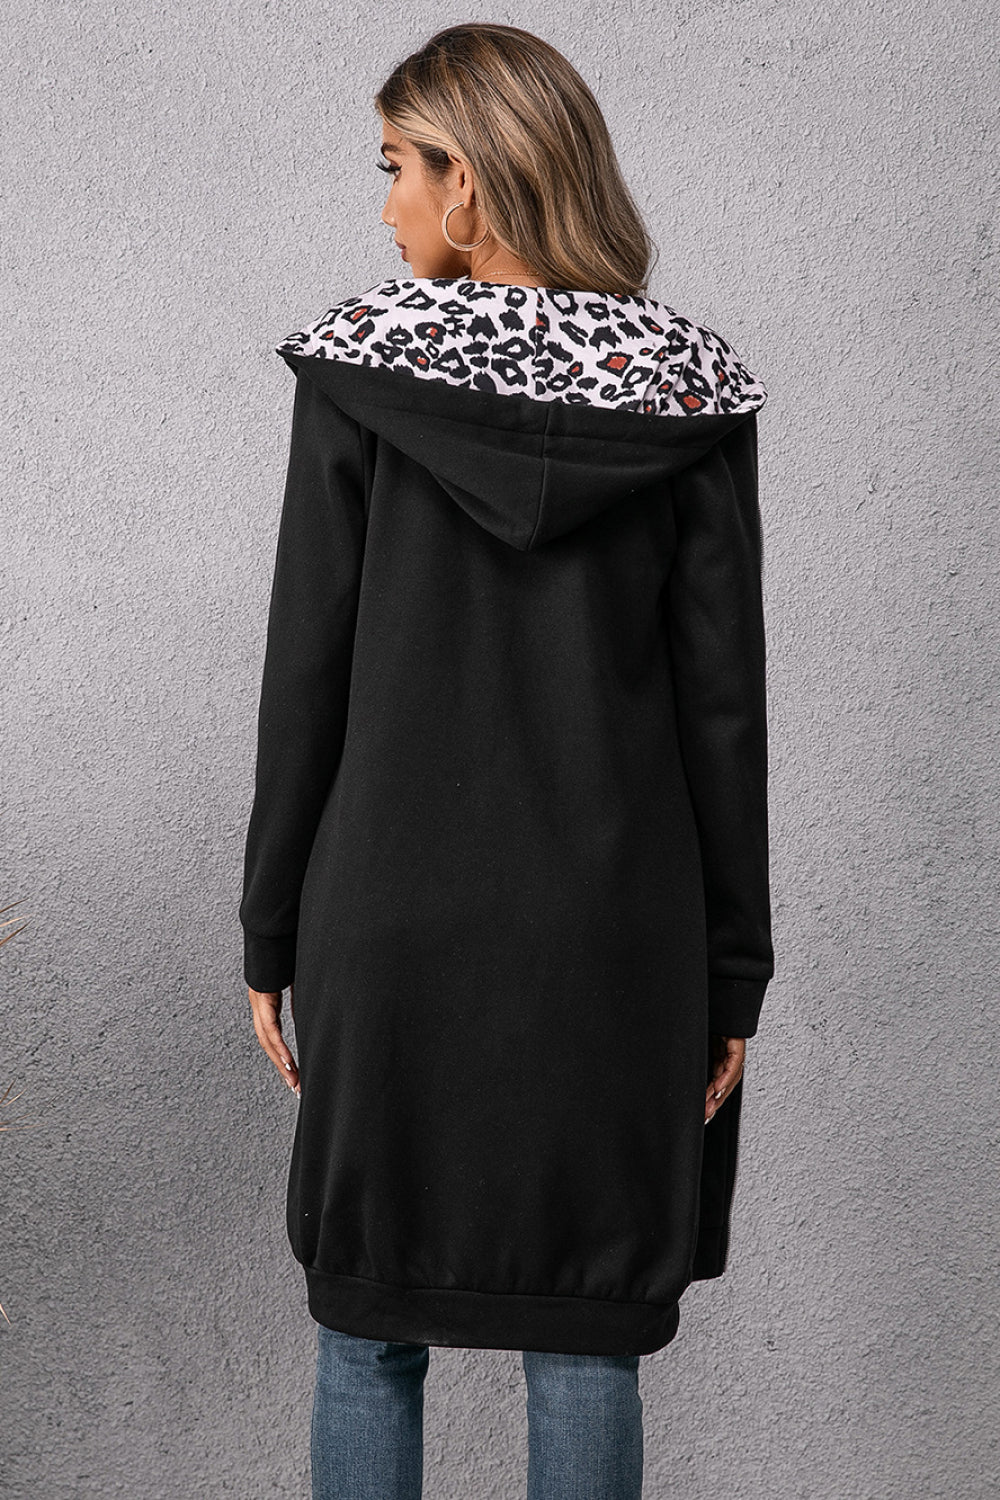 Black Oversized and Long Hoodie back view hood down